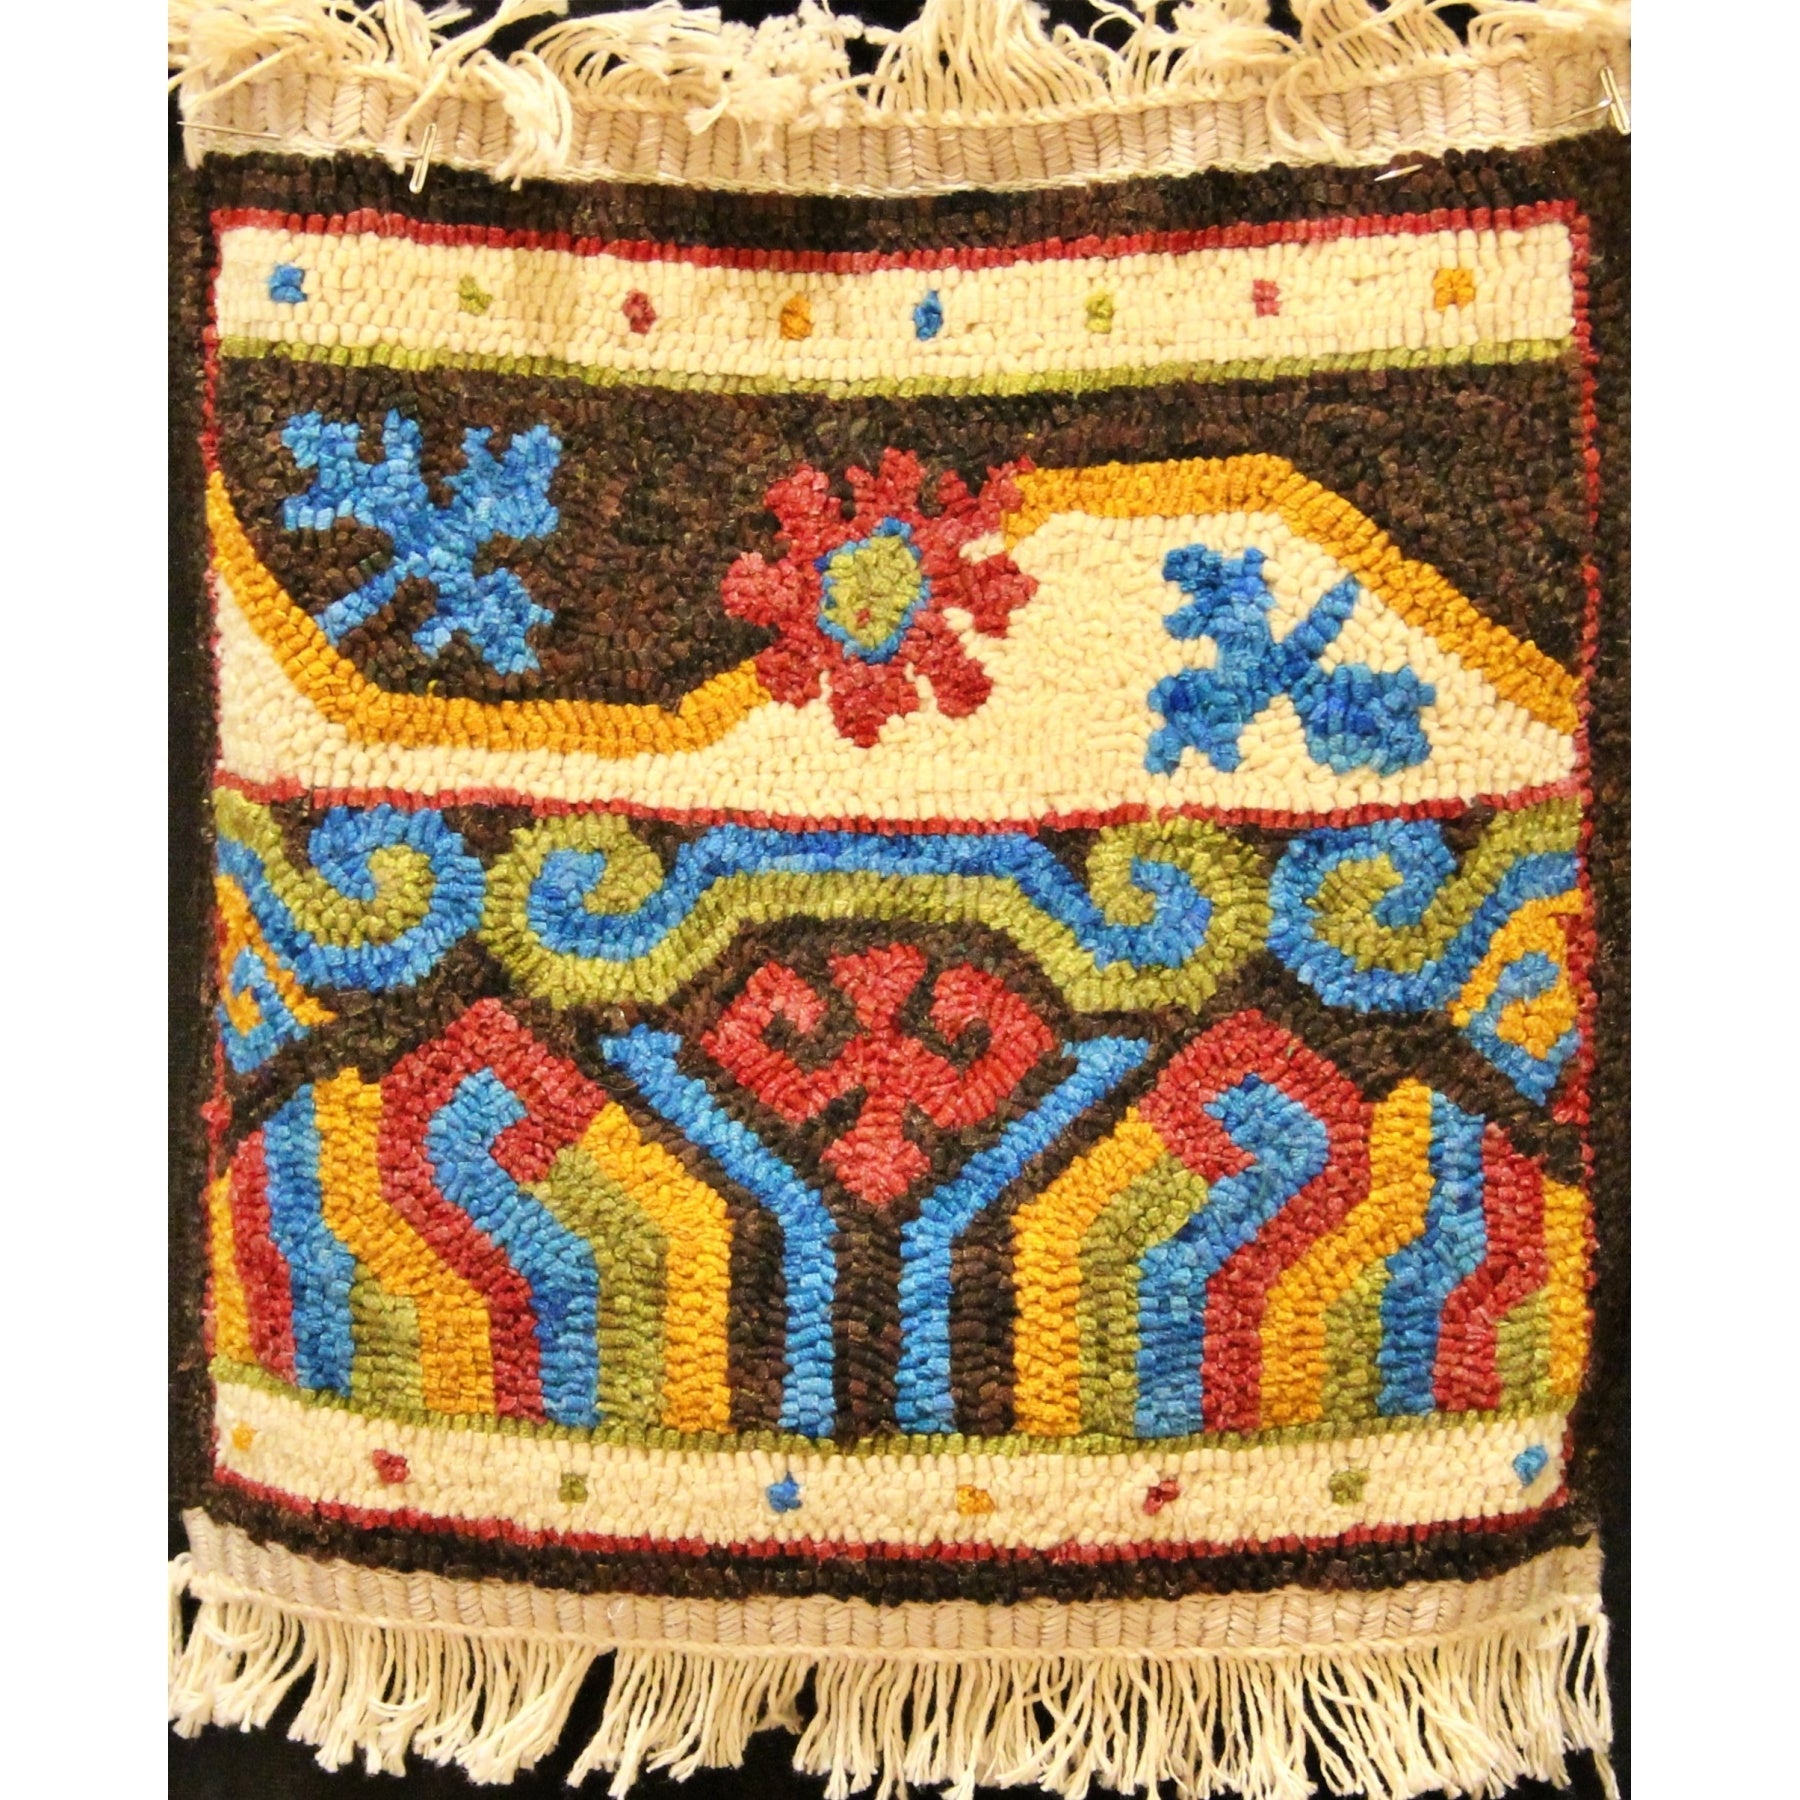 Samarkand  (Small), rug hooked by Vivily Powers